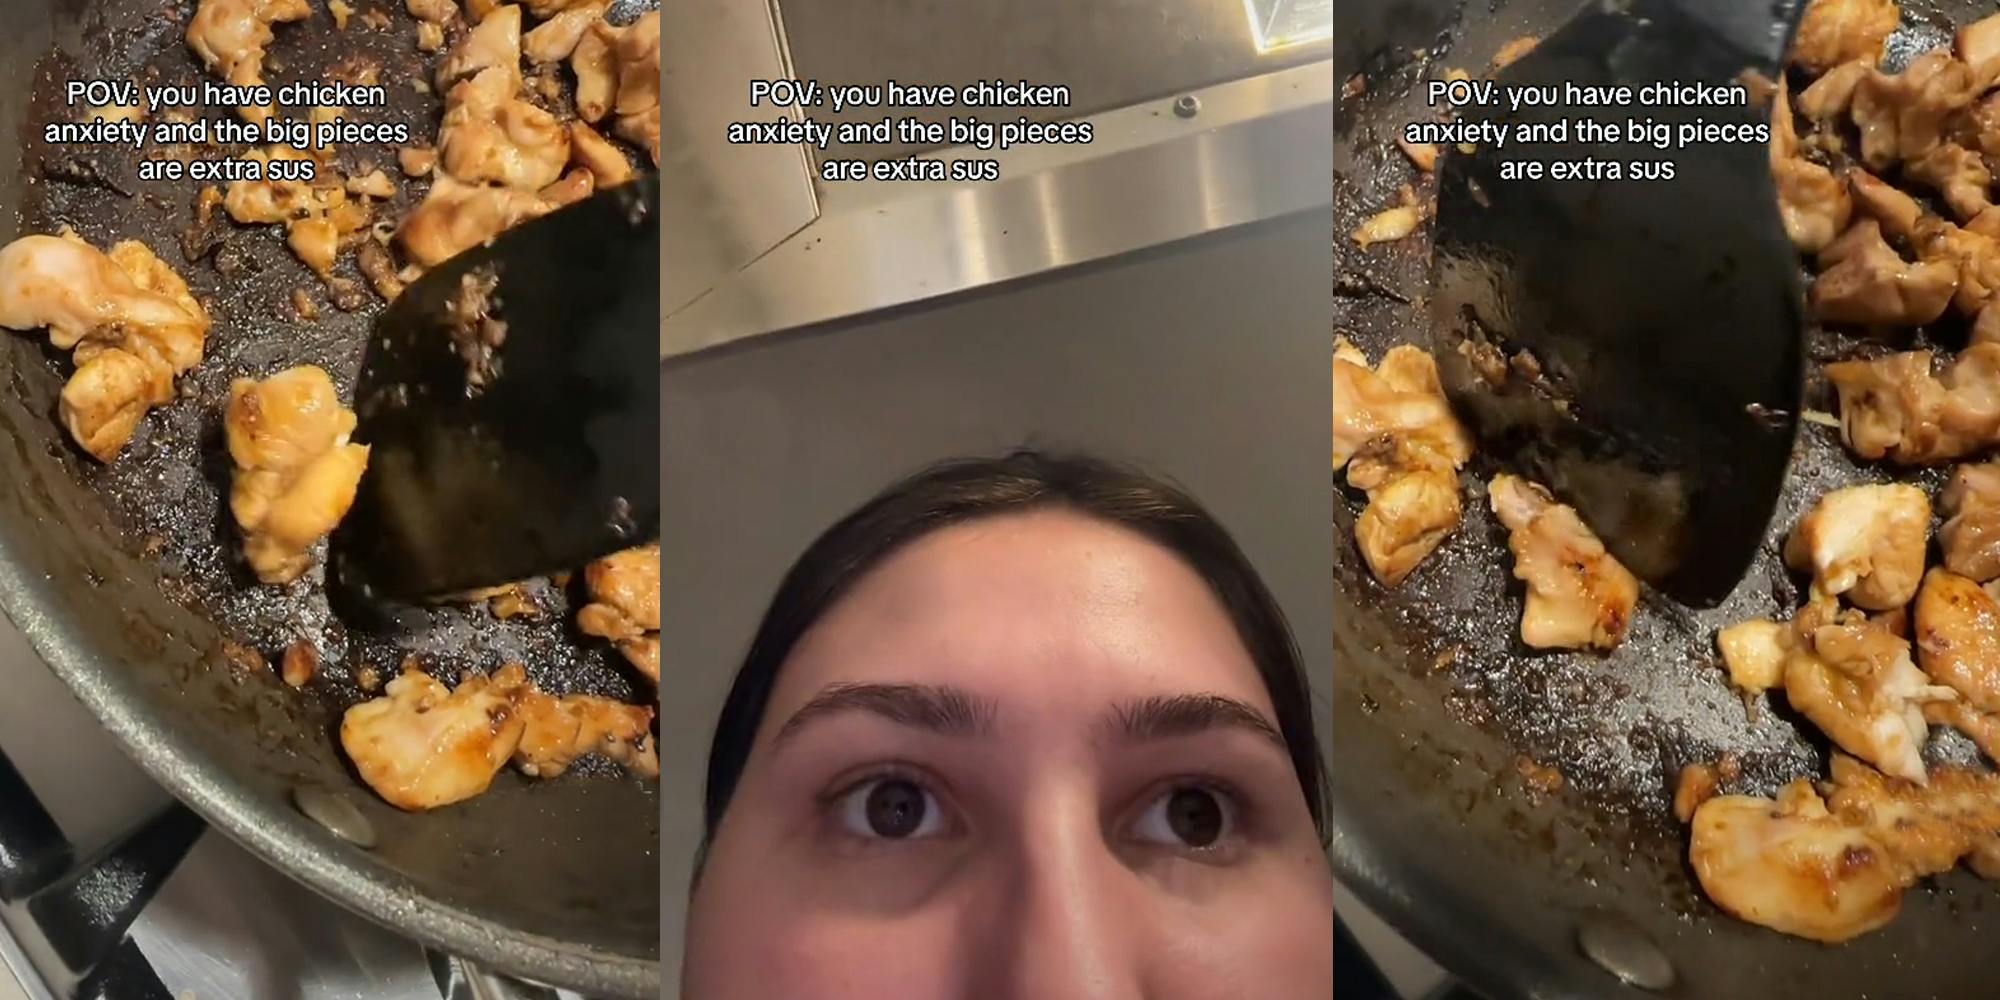 chicken cooking in pan with caption "POV: you have chicken anxiety and the big pieces are looking extra sus" (l) woman staring with caption "POV: you have chicken anxiety and the big pieces are looking extra sus" (c) chicken cooking in pan with caption "POV: you have chicken anxiety and the big pieces are looking extra sus" (r)